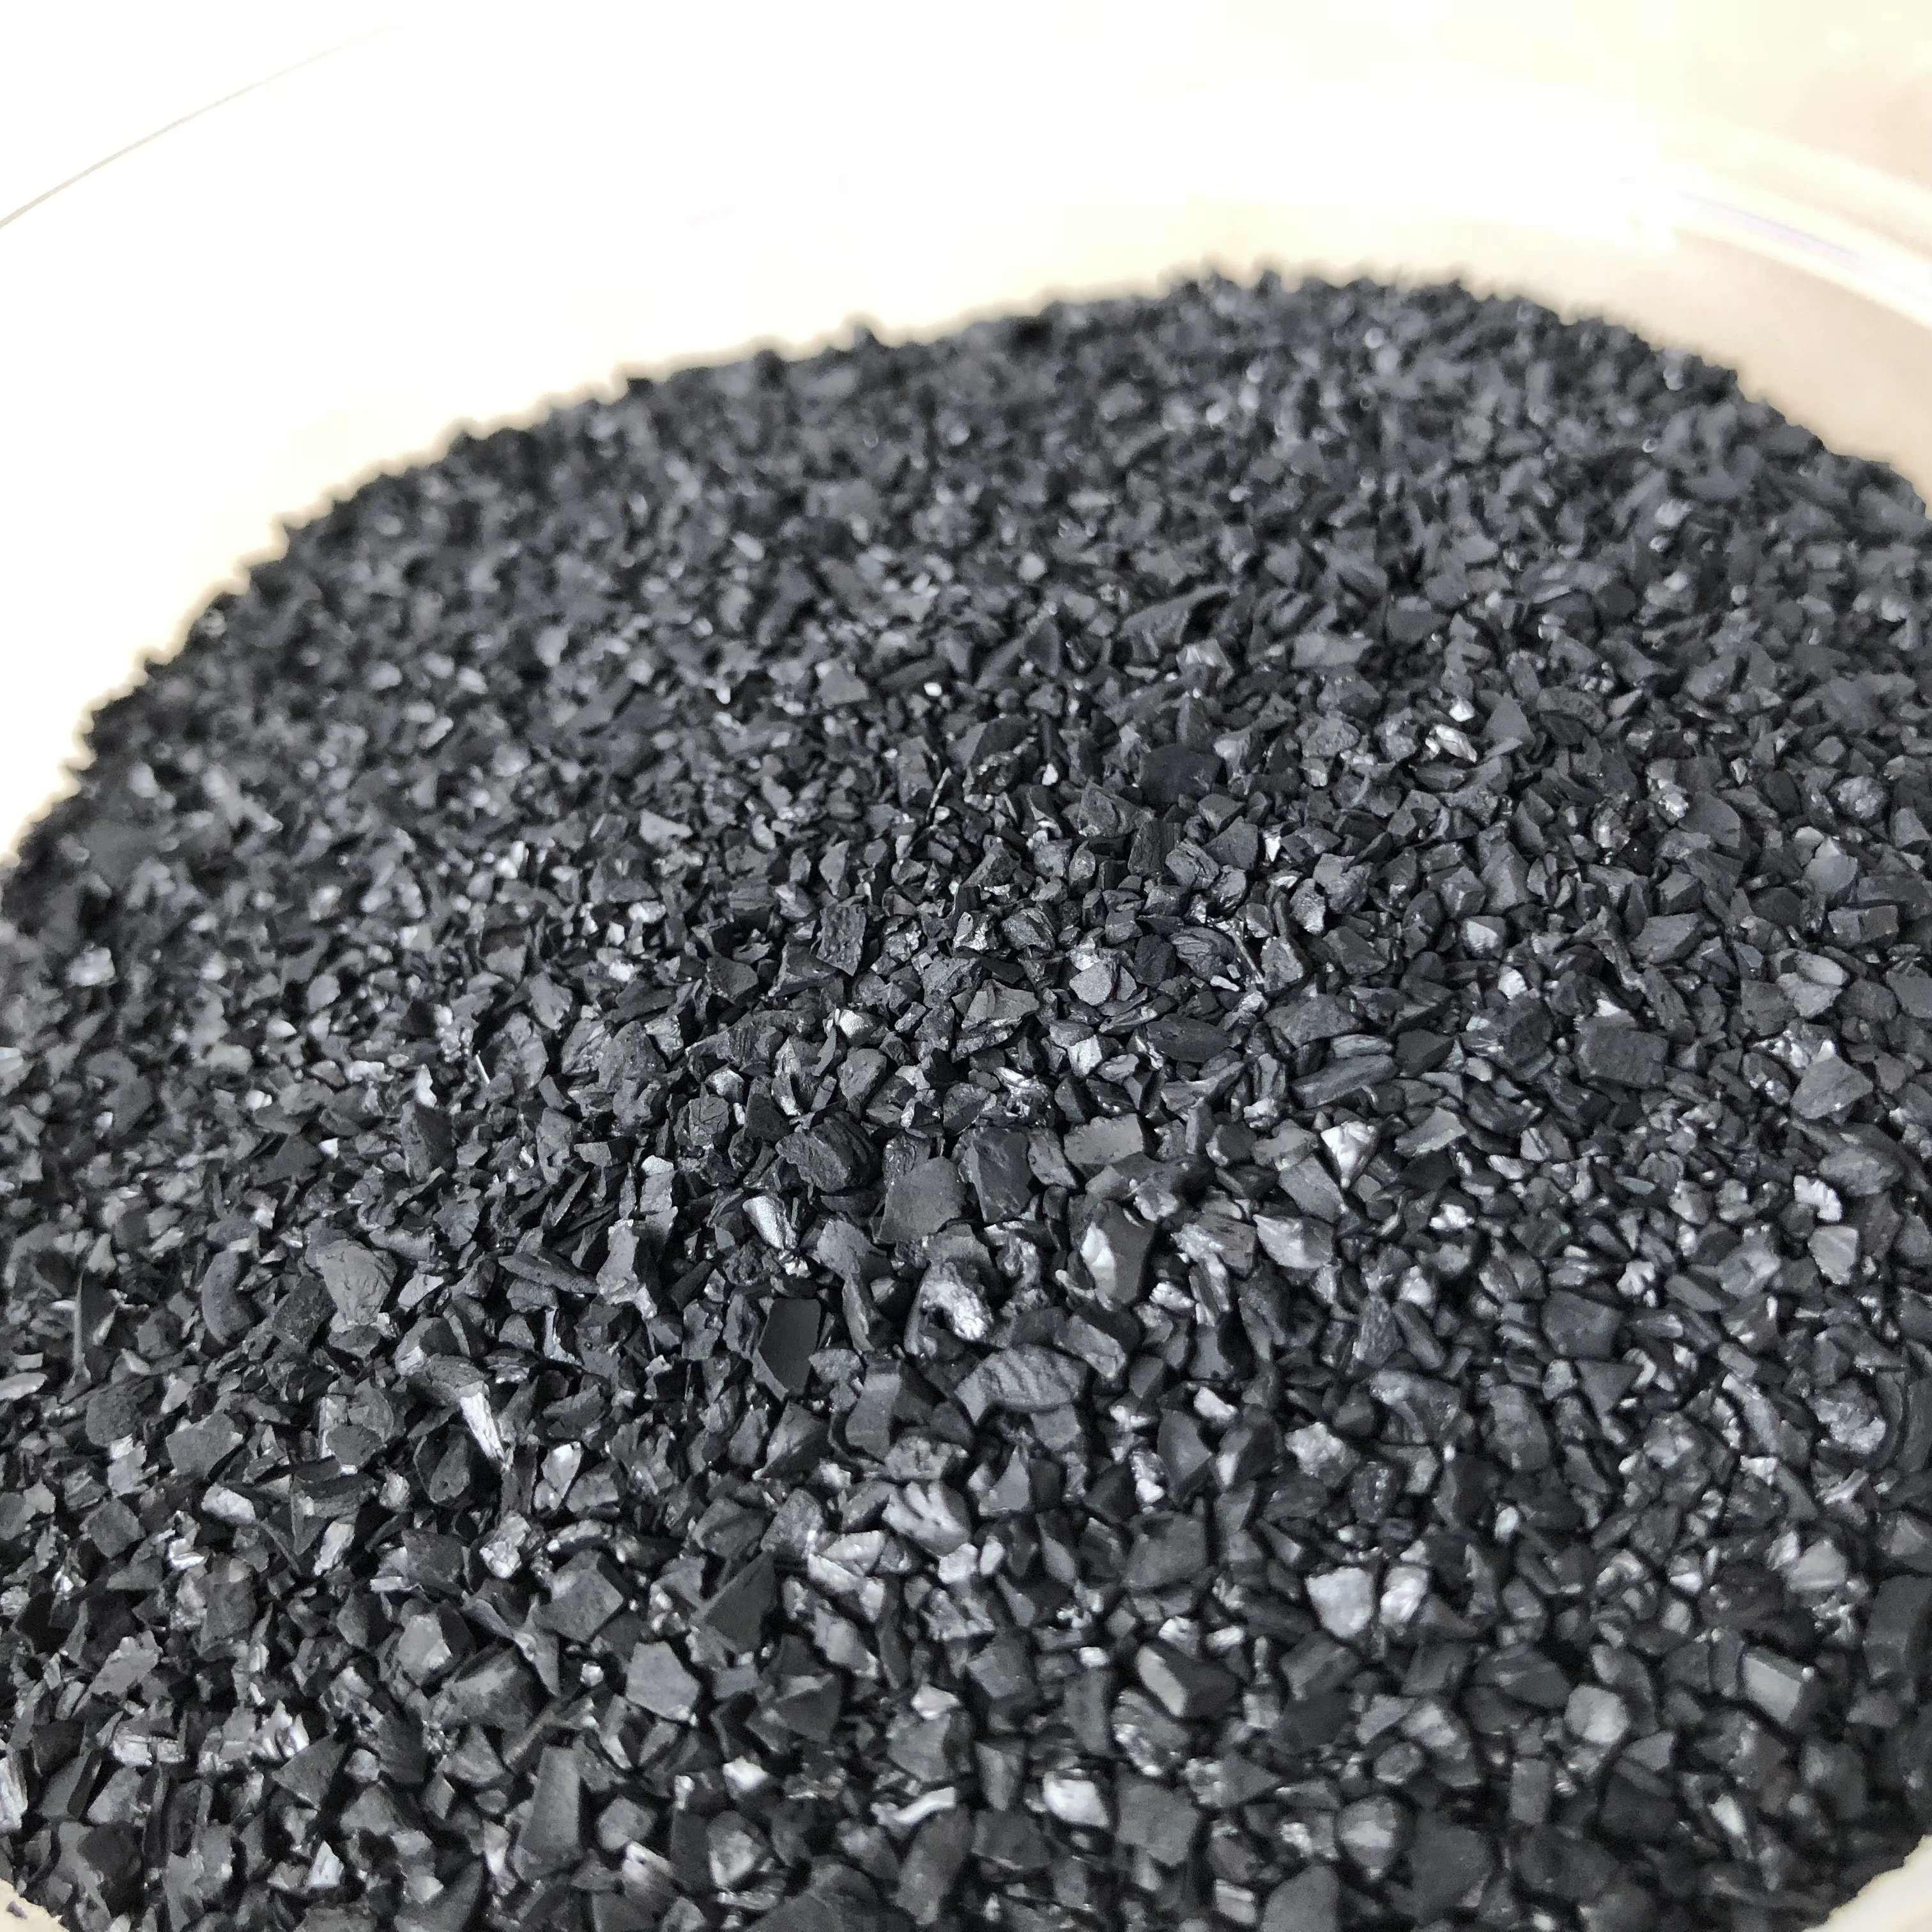 Factory manufacture various high quality powder activated carbon price